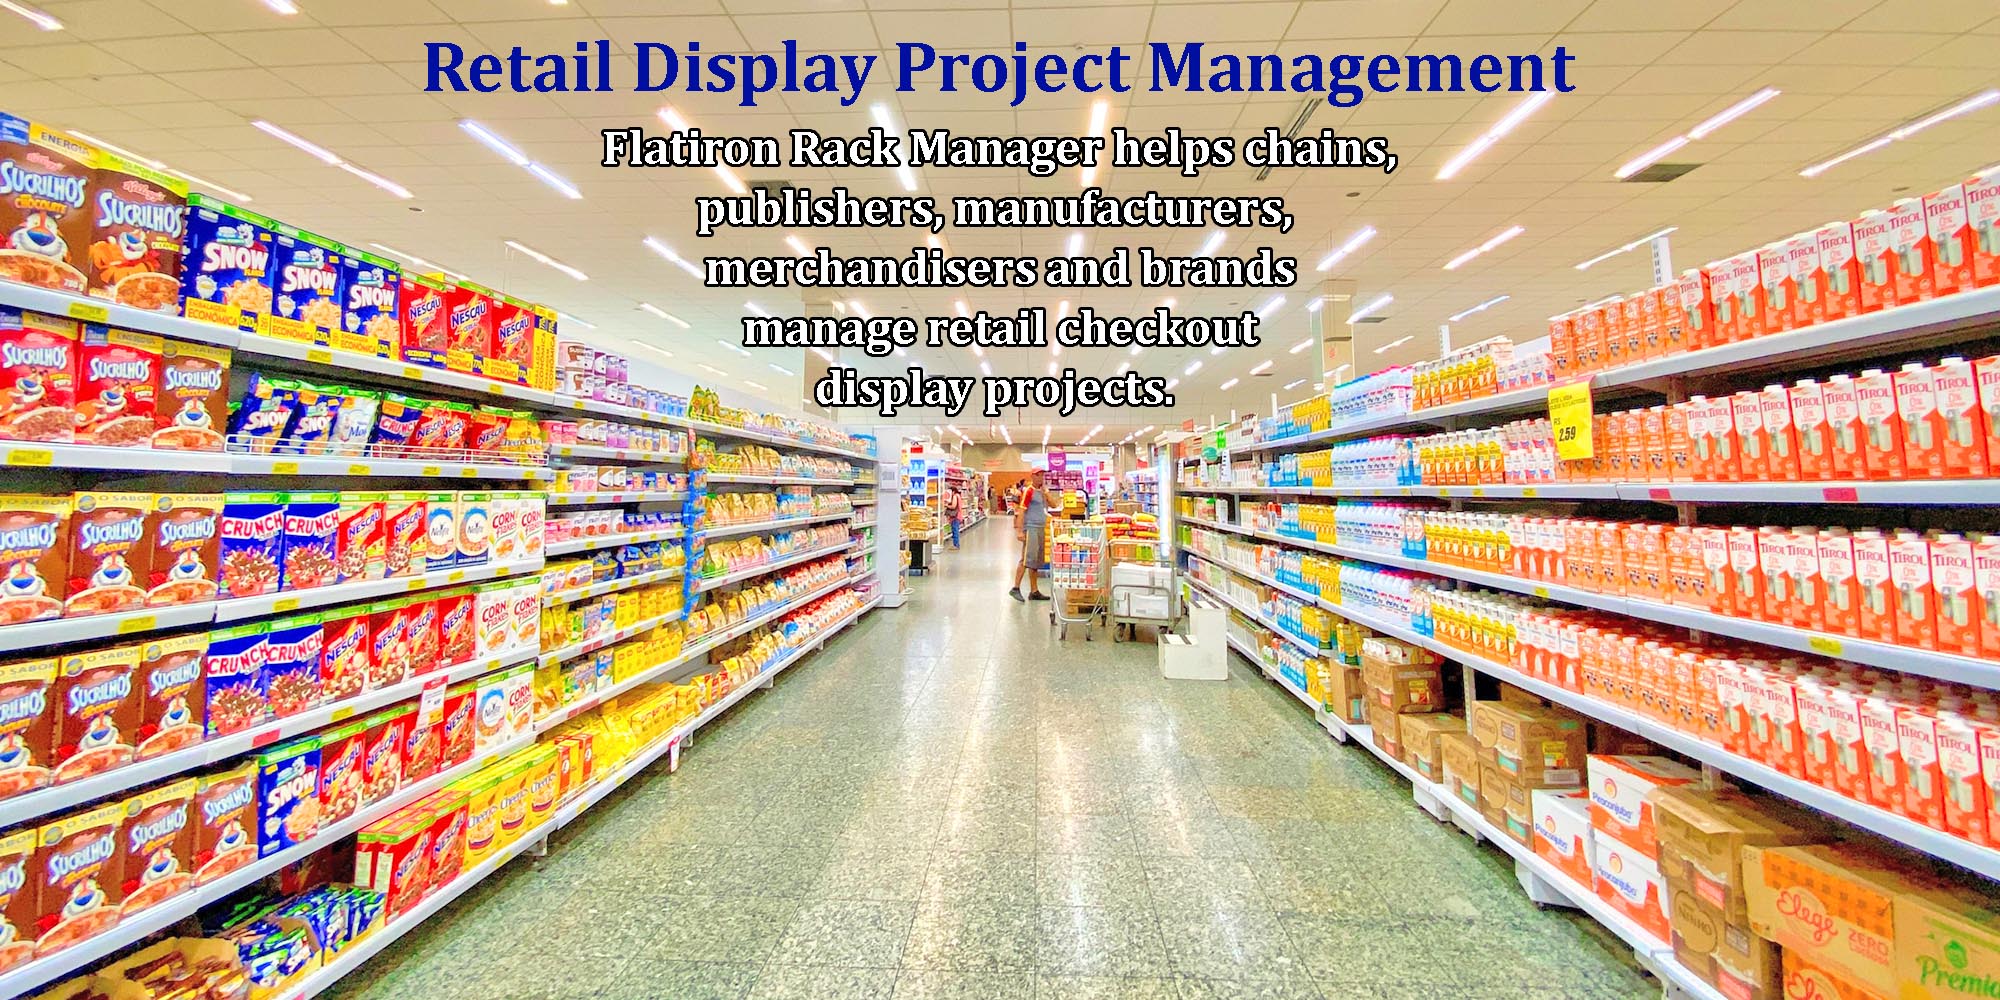 Retail Display Project Management